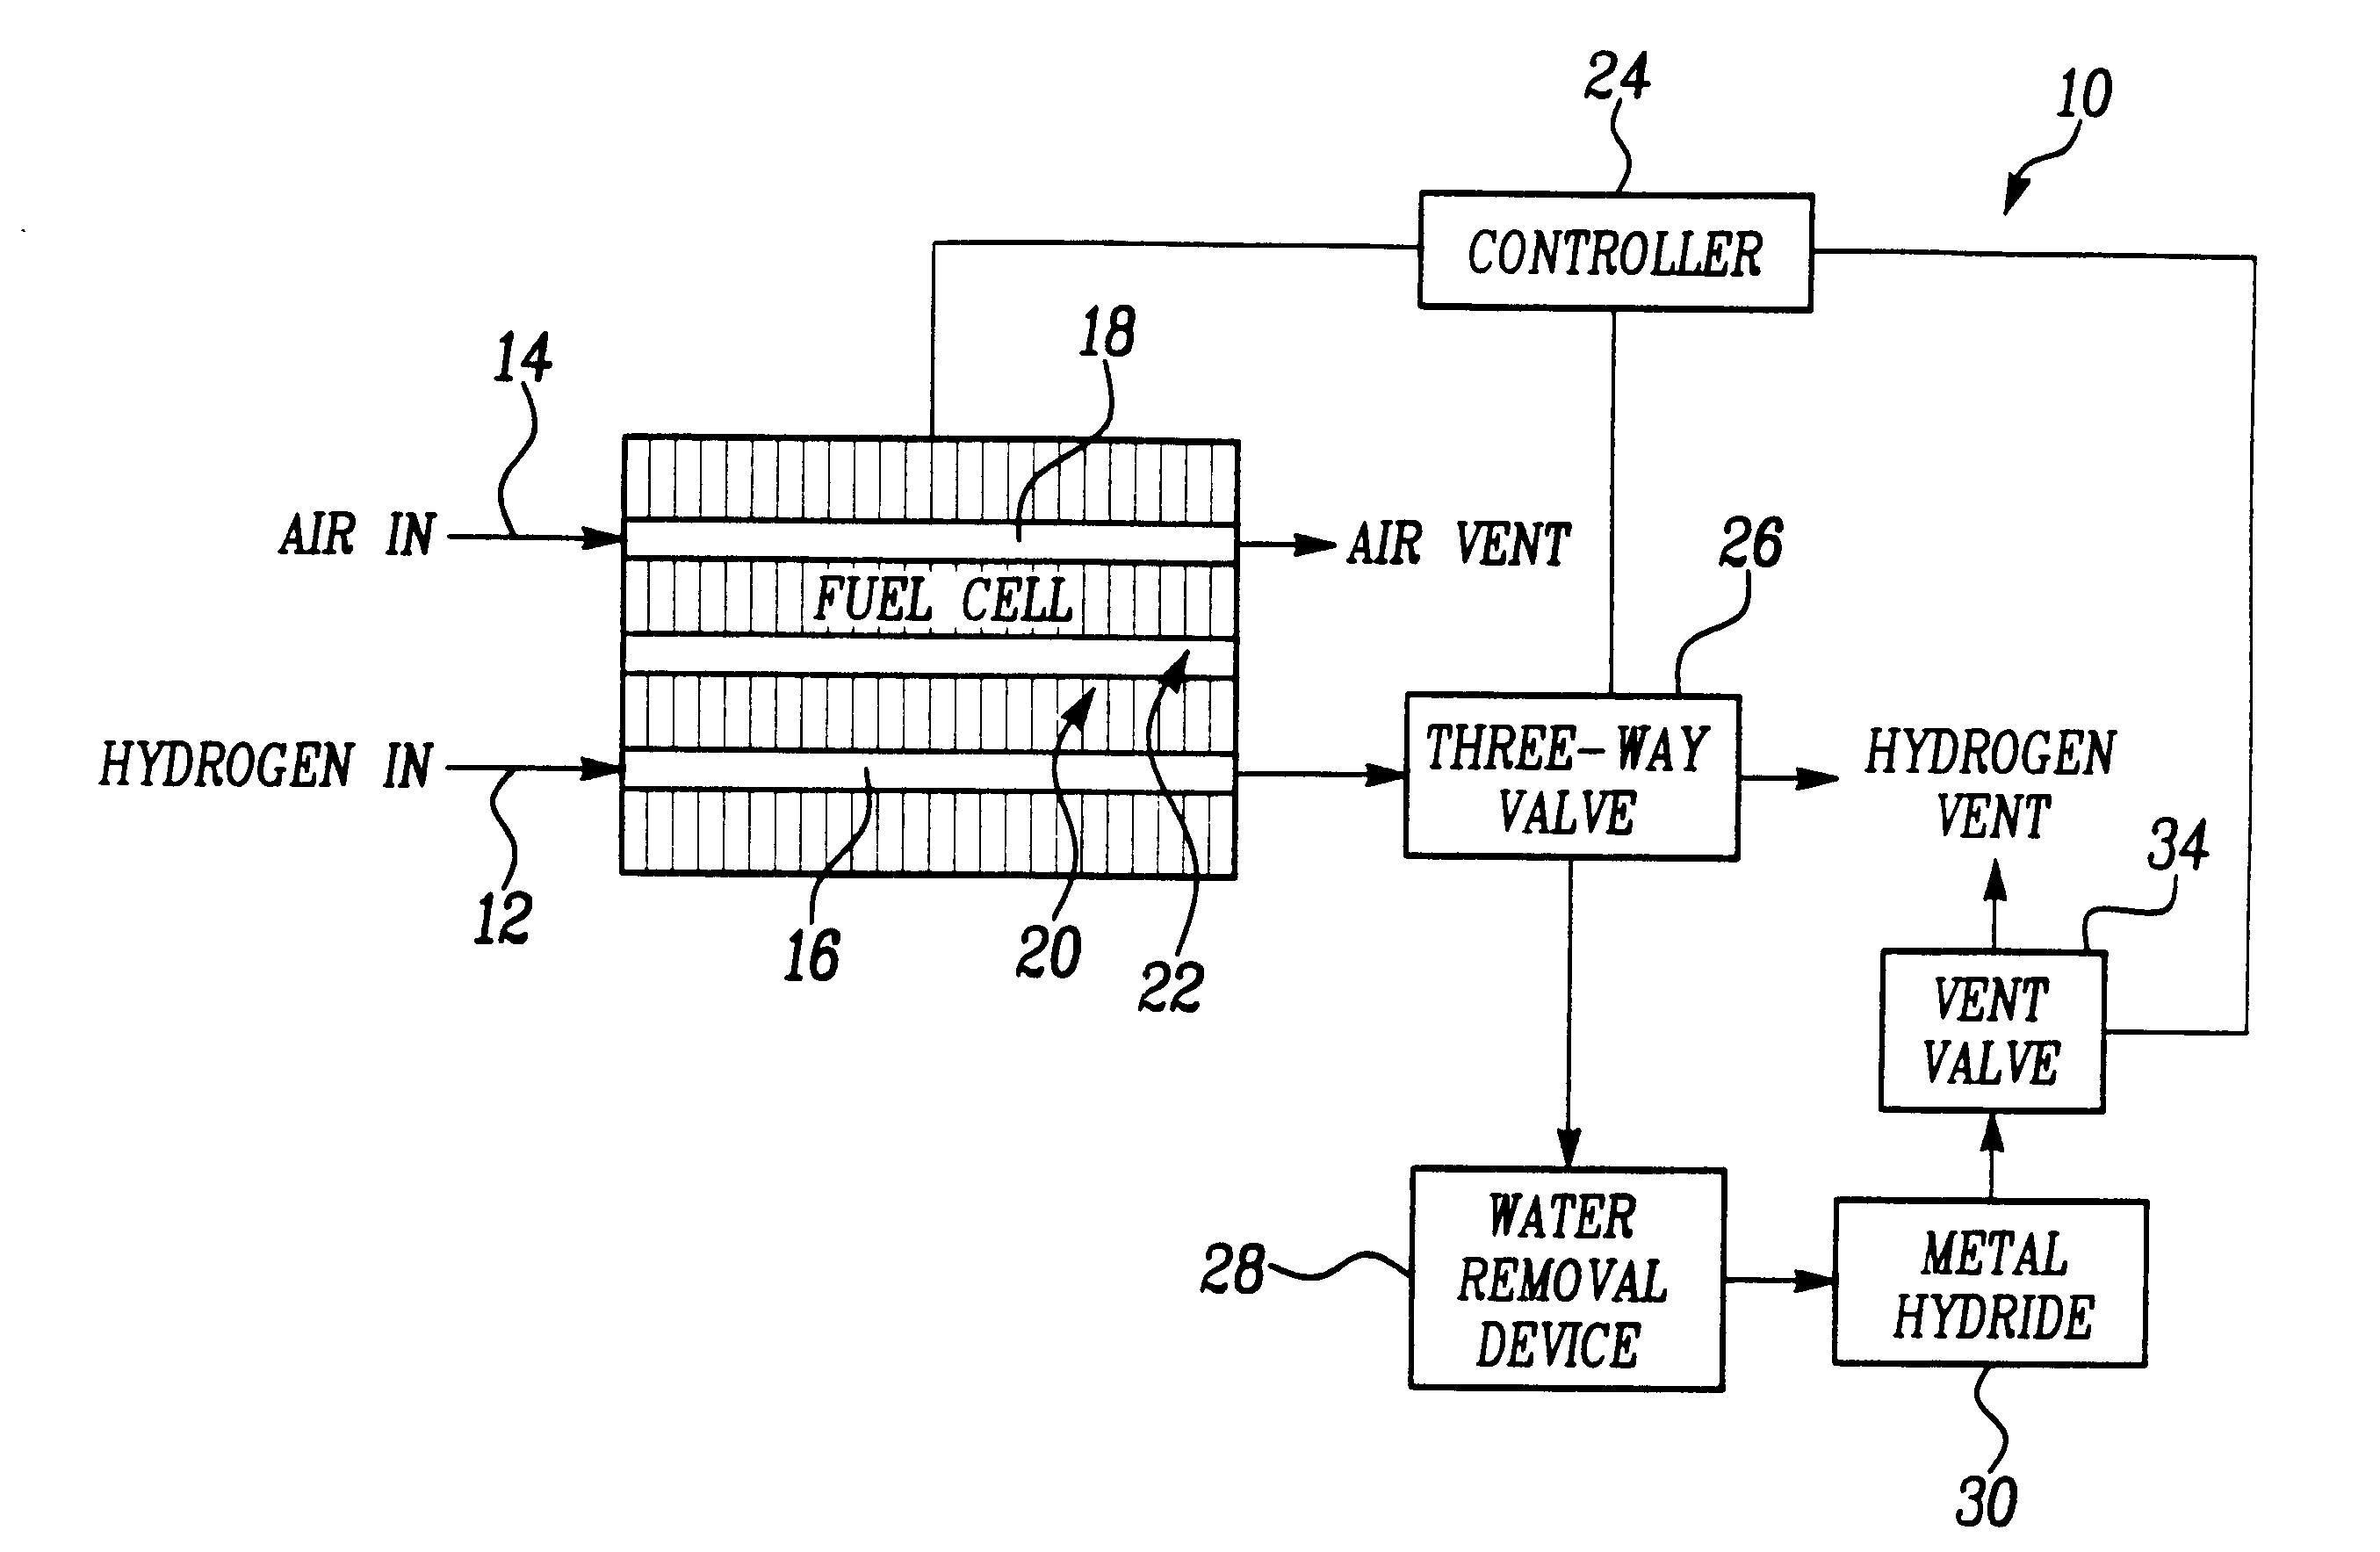 Method for storing purged hydrogen from a vehicle fuel cell system